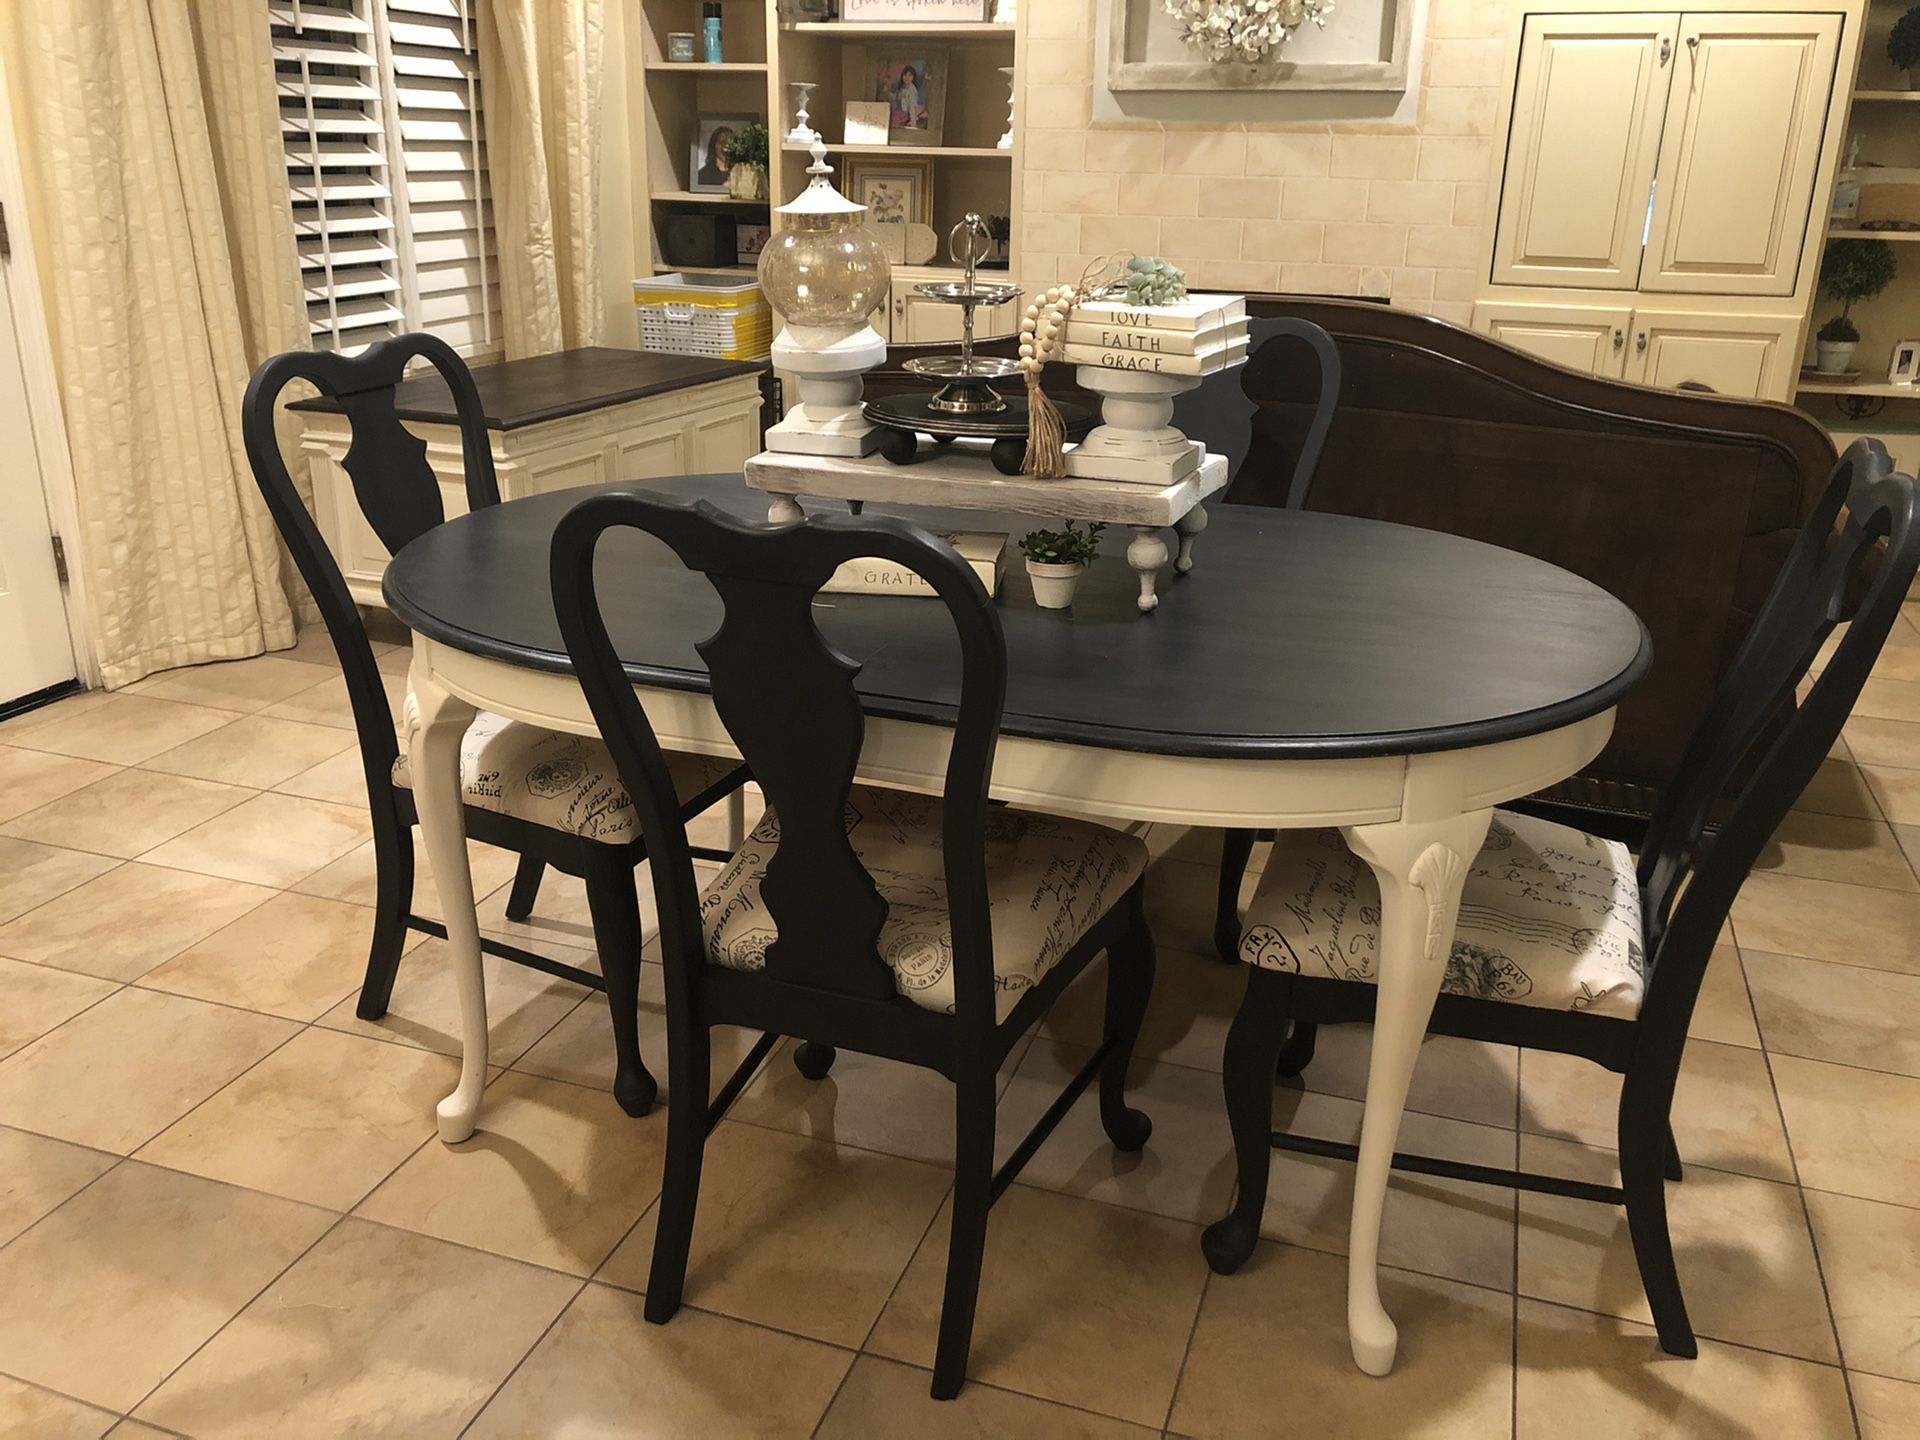 Black and White Table with 4 chairs